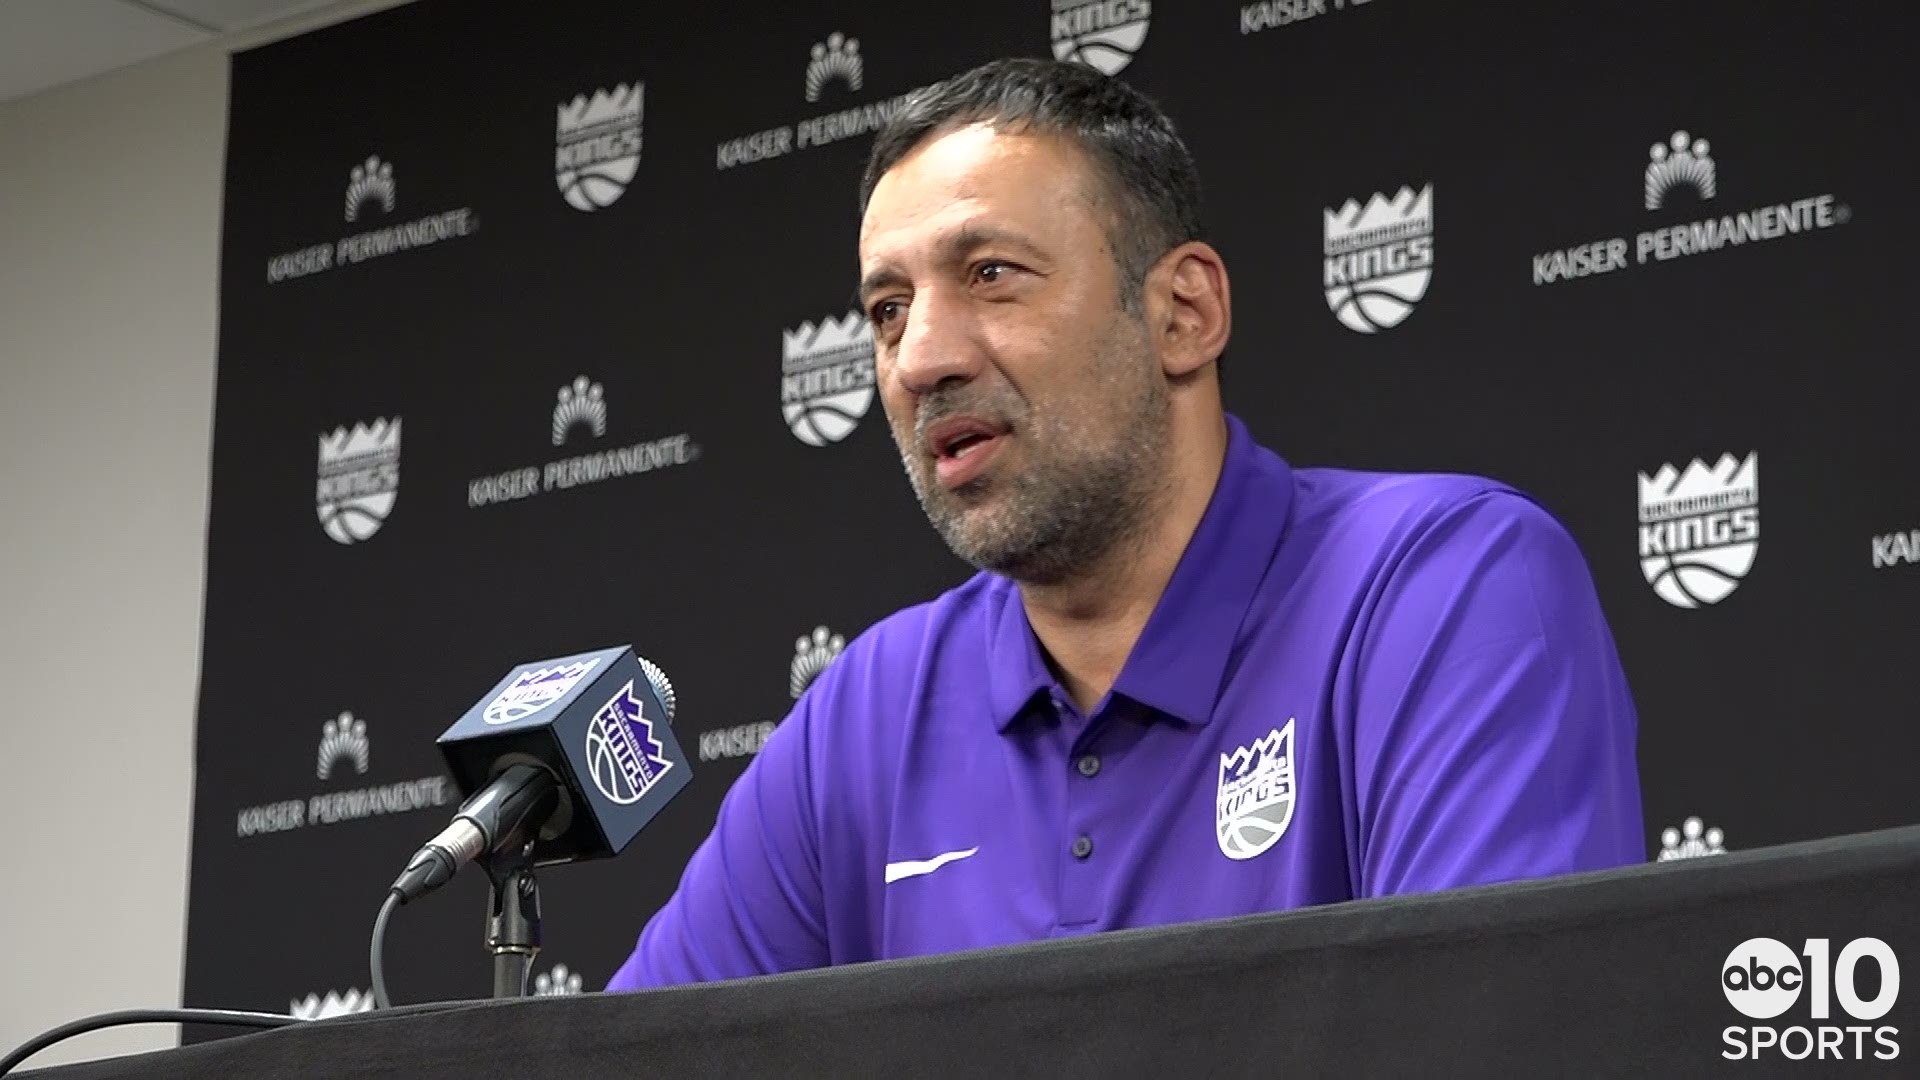 Kings General Manager Vlade Divac explains the decision making behind taking Marvin Bagley III second overall in the 2018 NBA Draft.